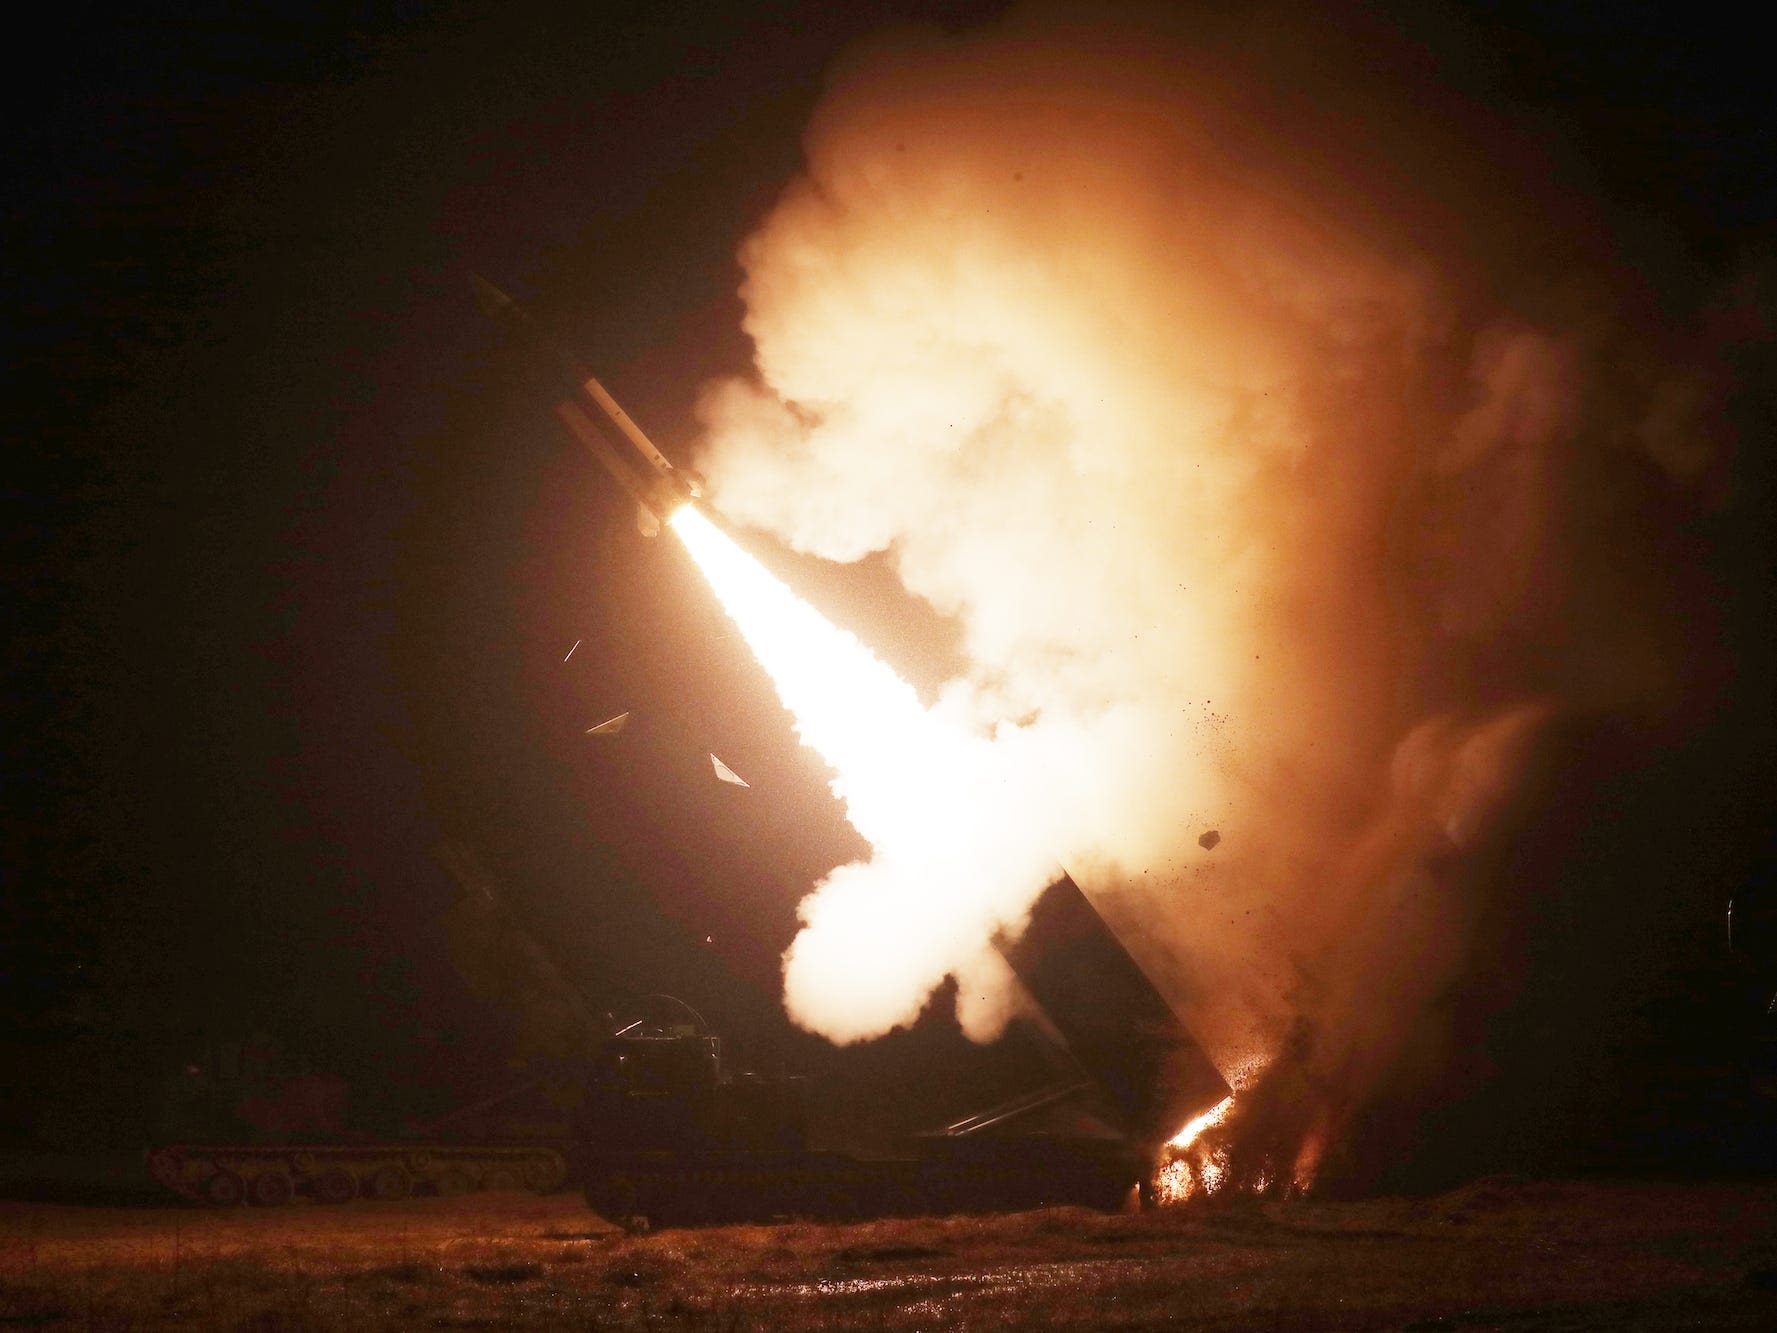 Ukraine's getting more longe-range missiles that leave the Russians with 'nowhere to hide'